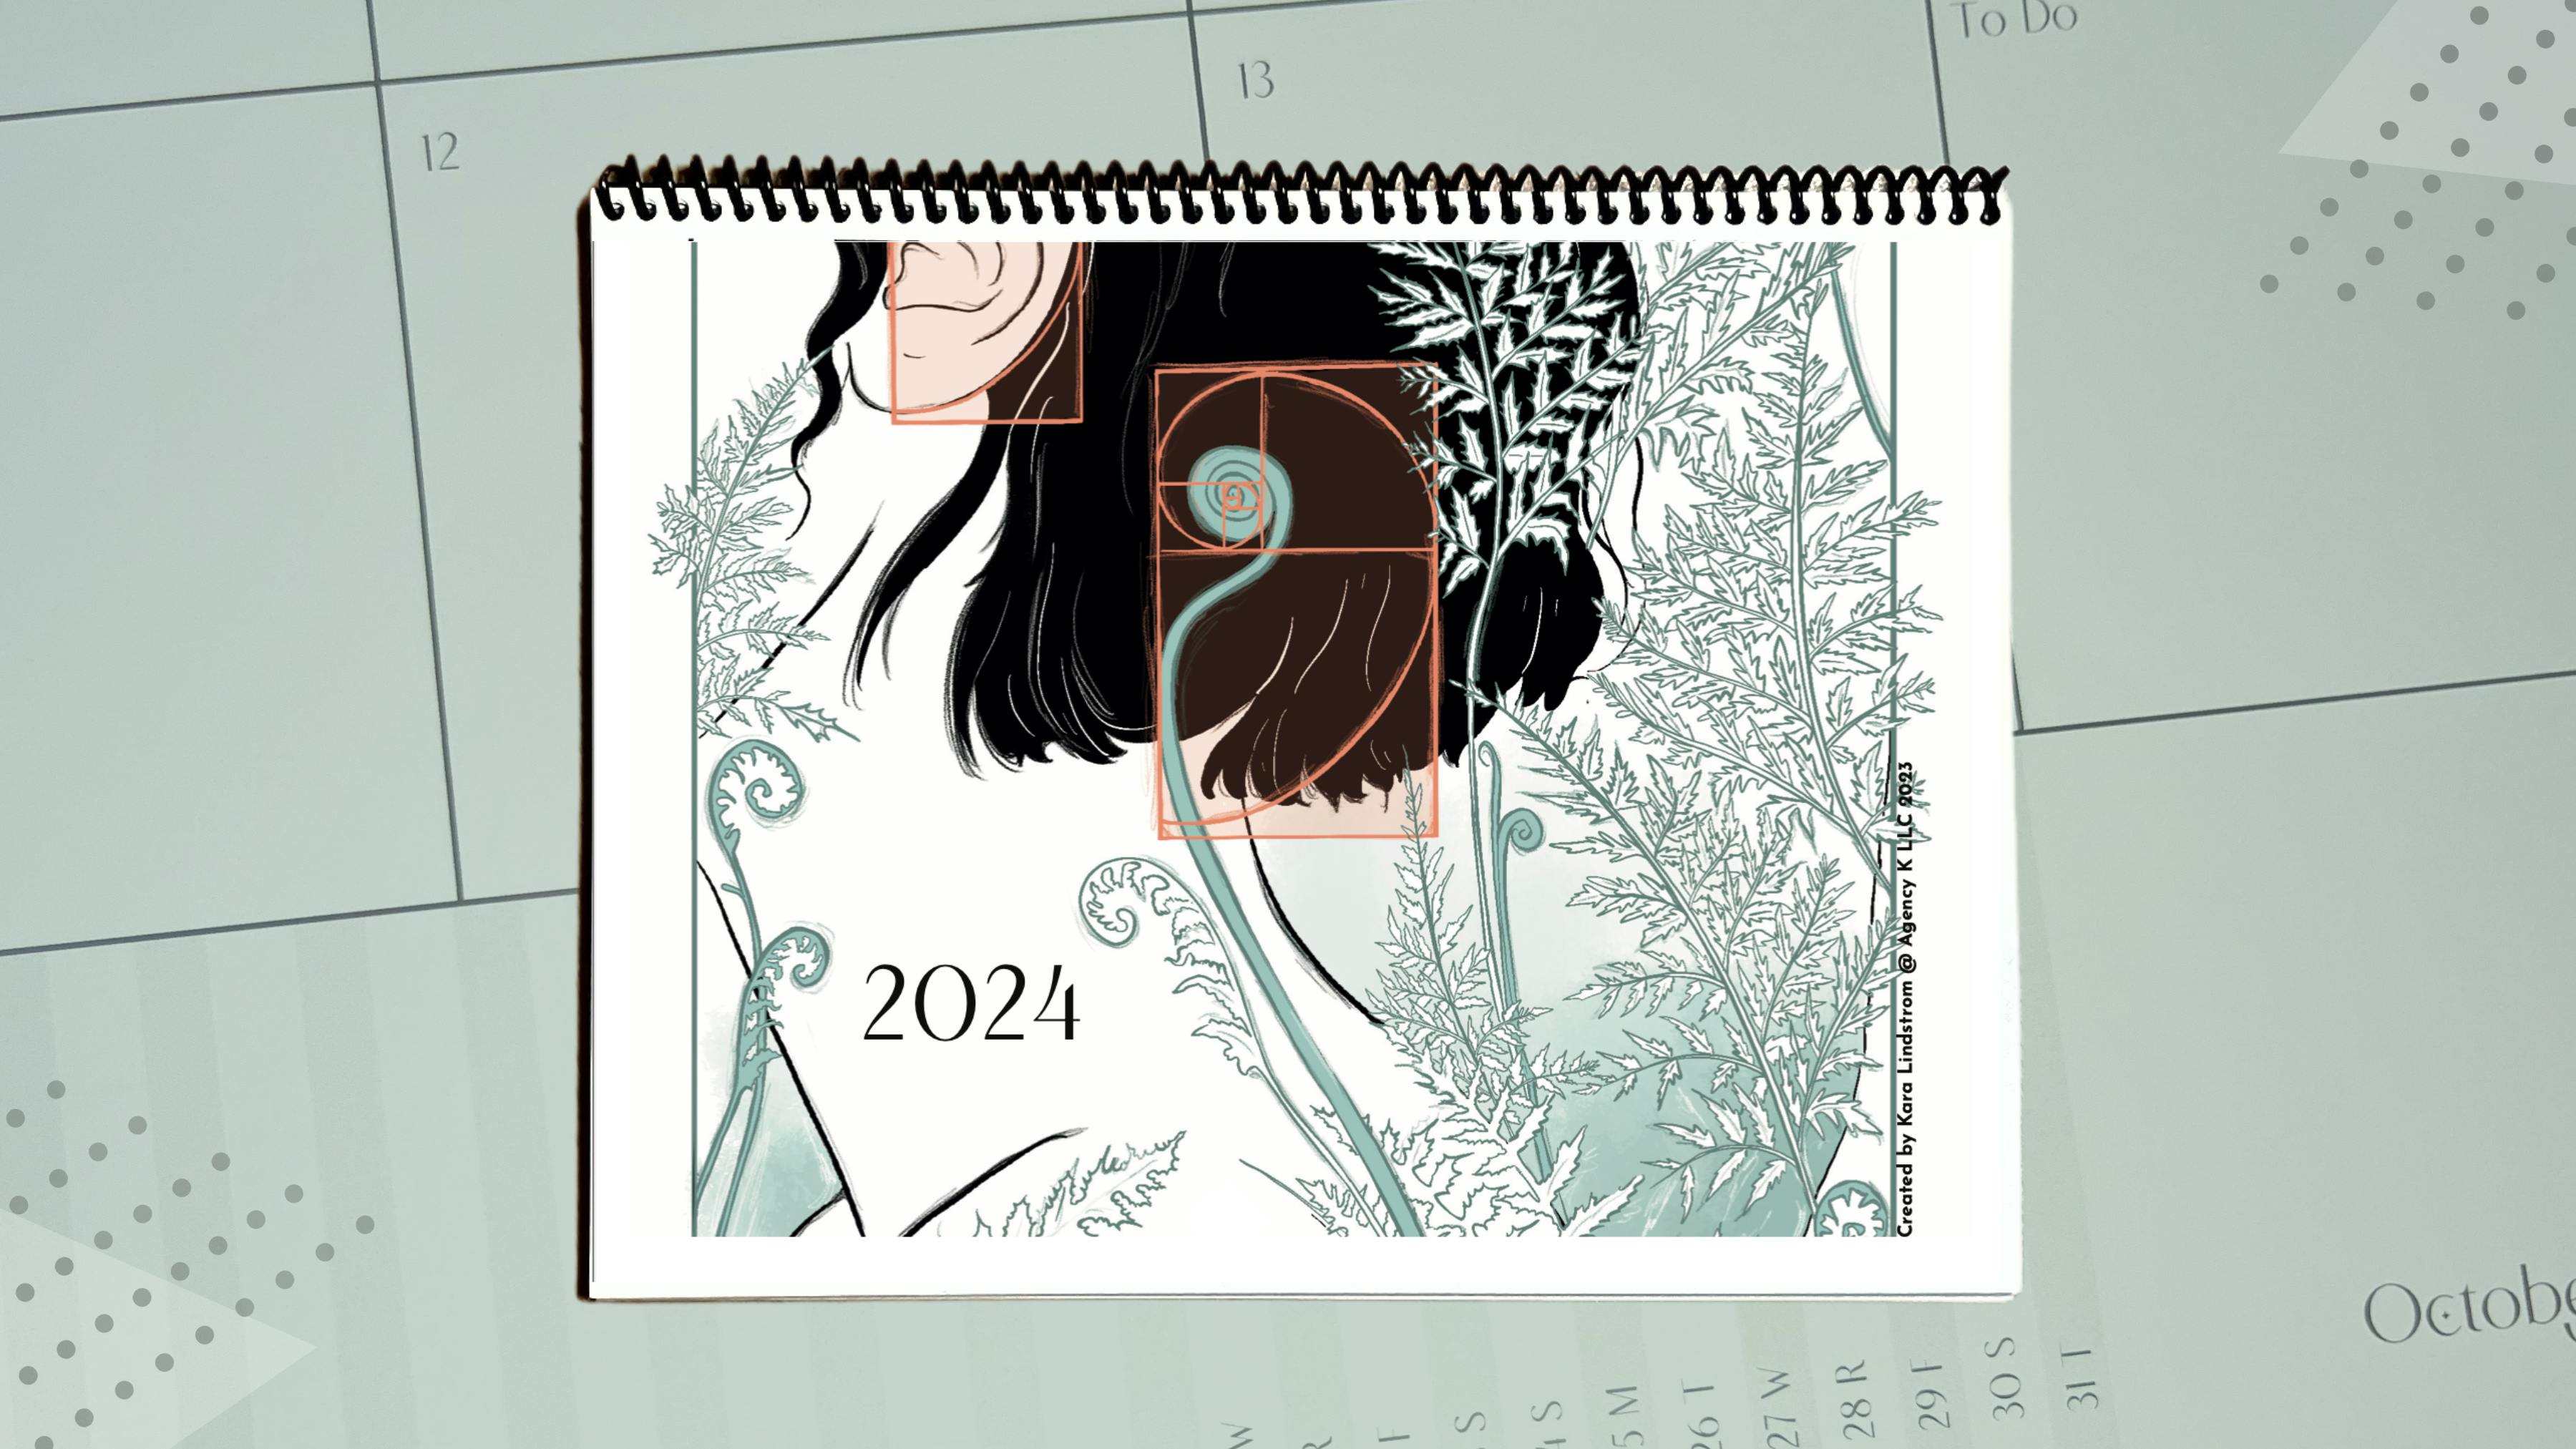 View of the 8.5x11 inch planner over a background of the unique split-view layout.